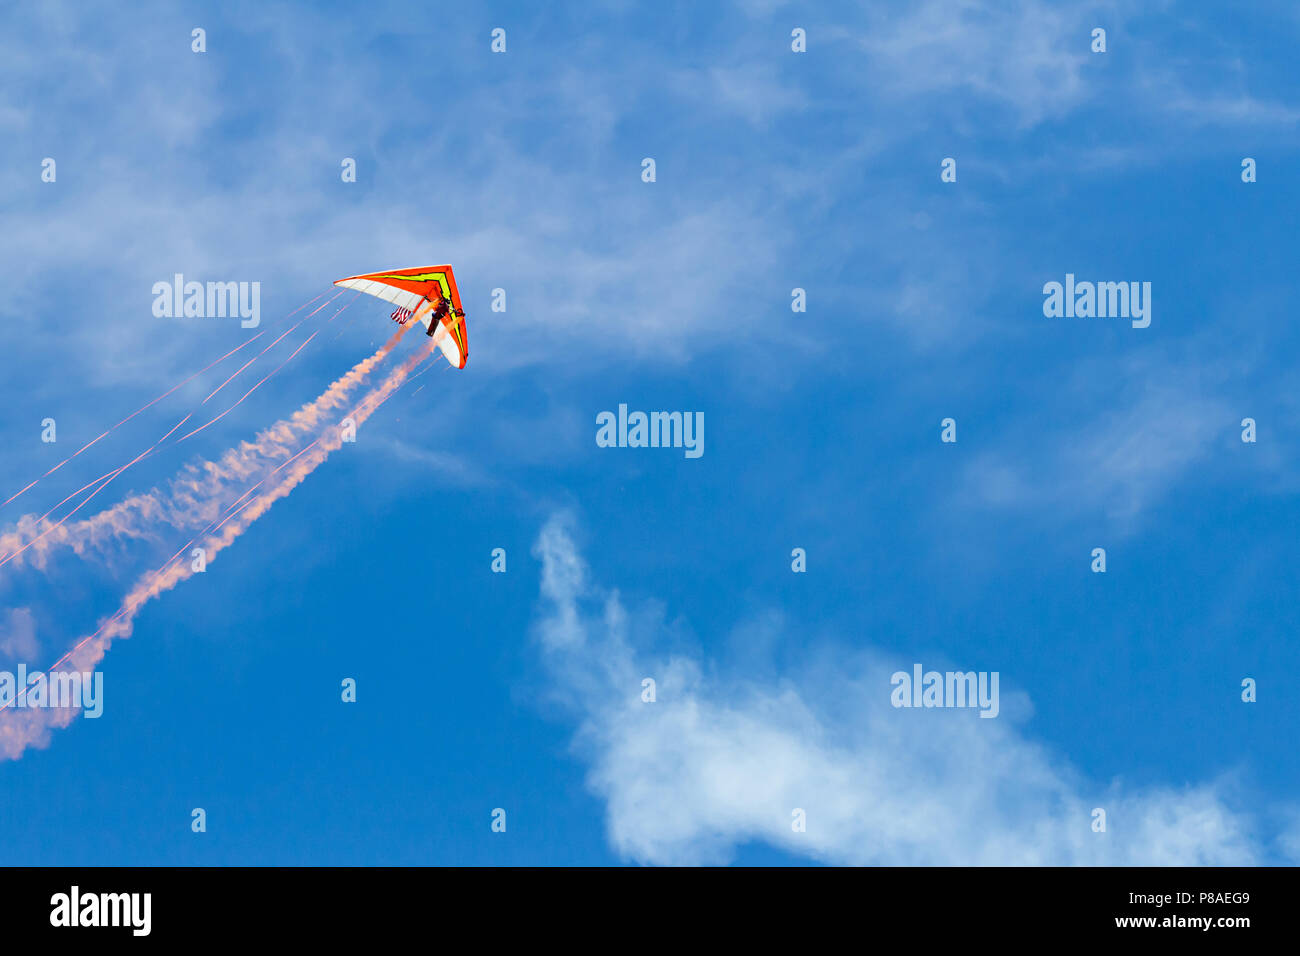 Hang glider with smoke trails and streamers against a blue sky with some cloud cover. Lots of copyspace available Stock Photo